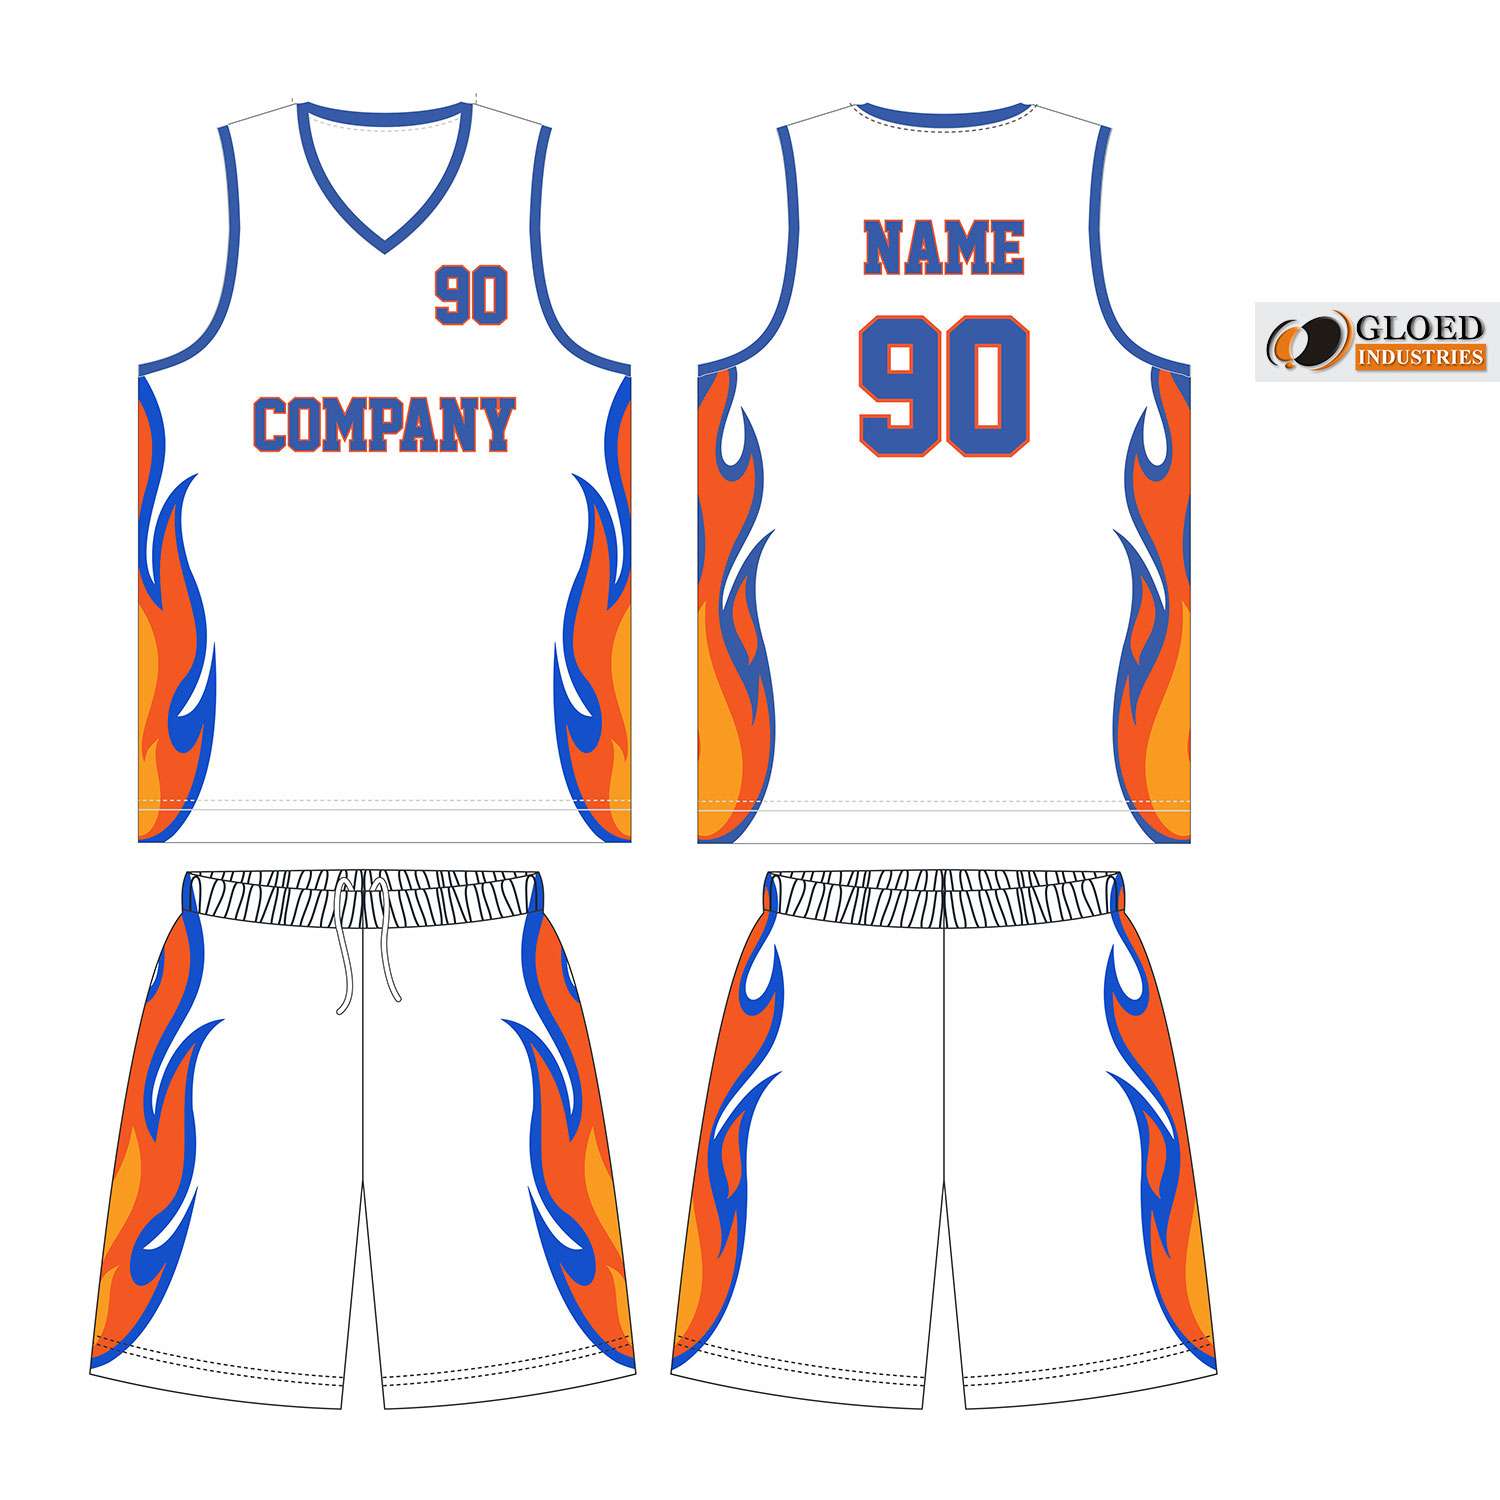 White basketball jersey with mesh inserts showcasing large logo graphic on front. Part of full uniform set.